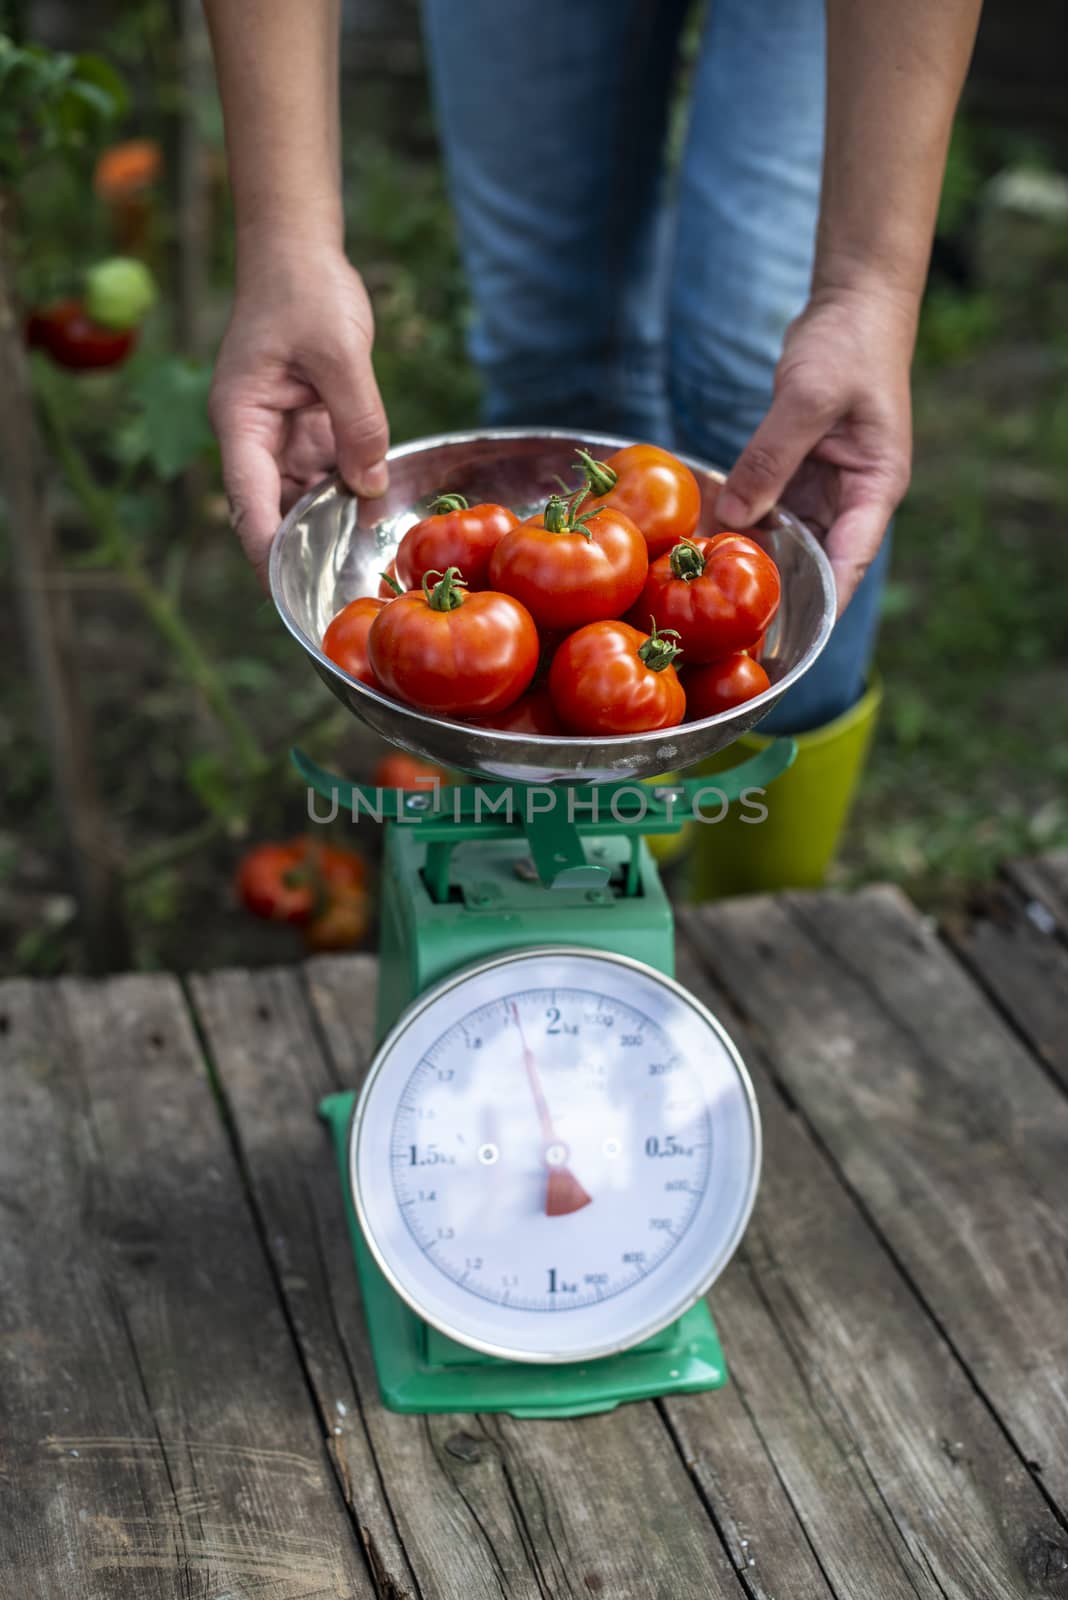 Woman puts tomatoes on scales. Home organic garden. Measure tomatoes weight in the farm.